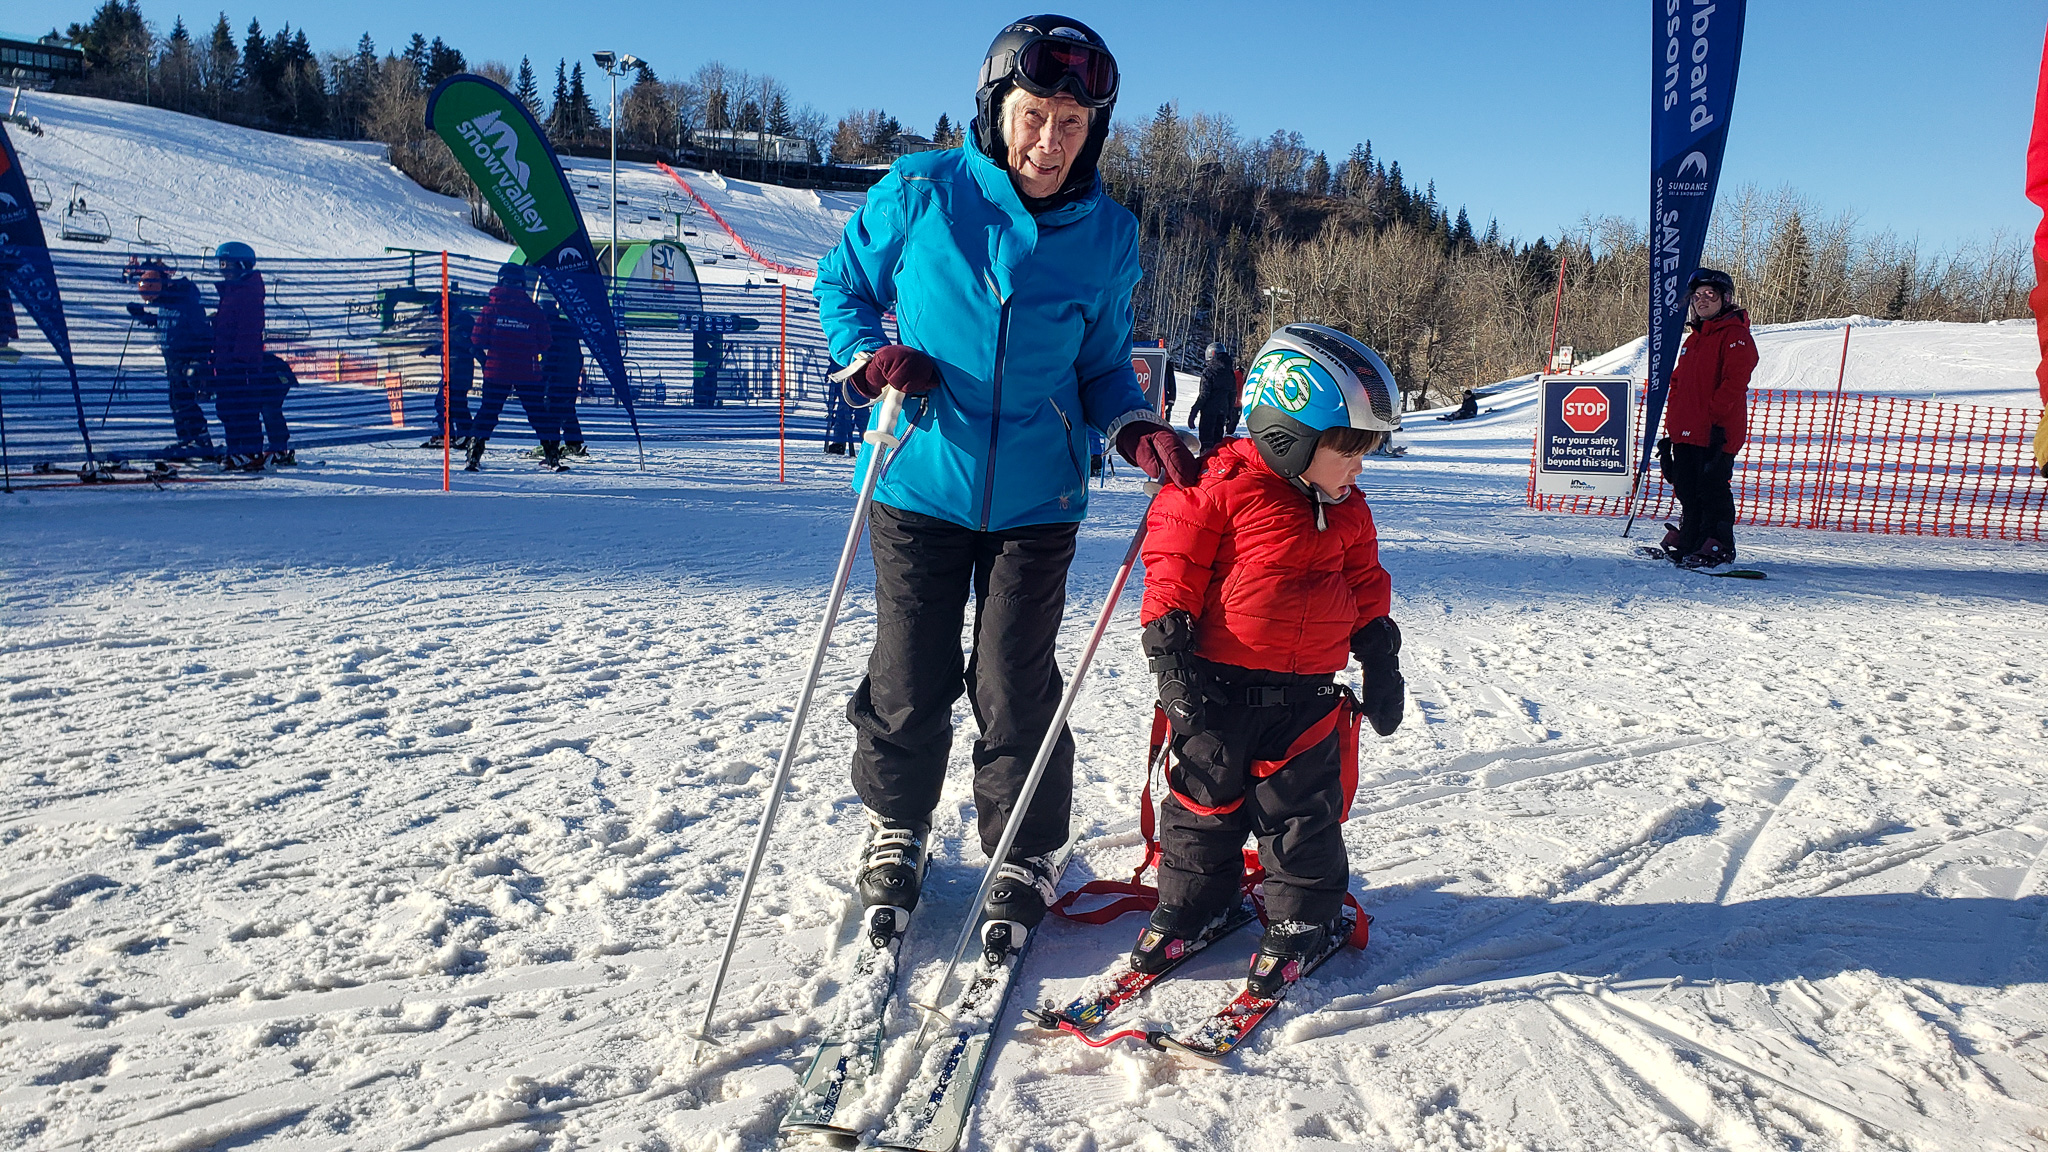 At 99 & 2, This Age-Defying Duo Hit The Slopes